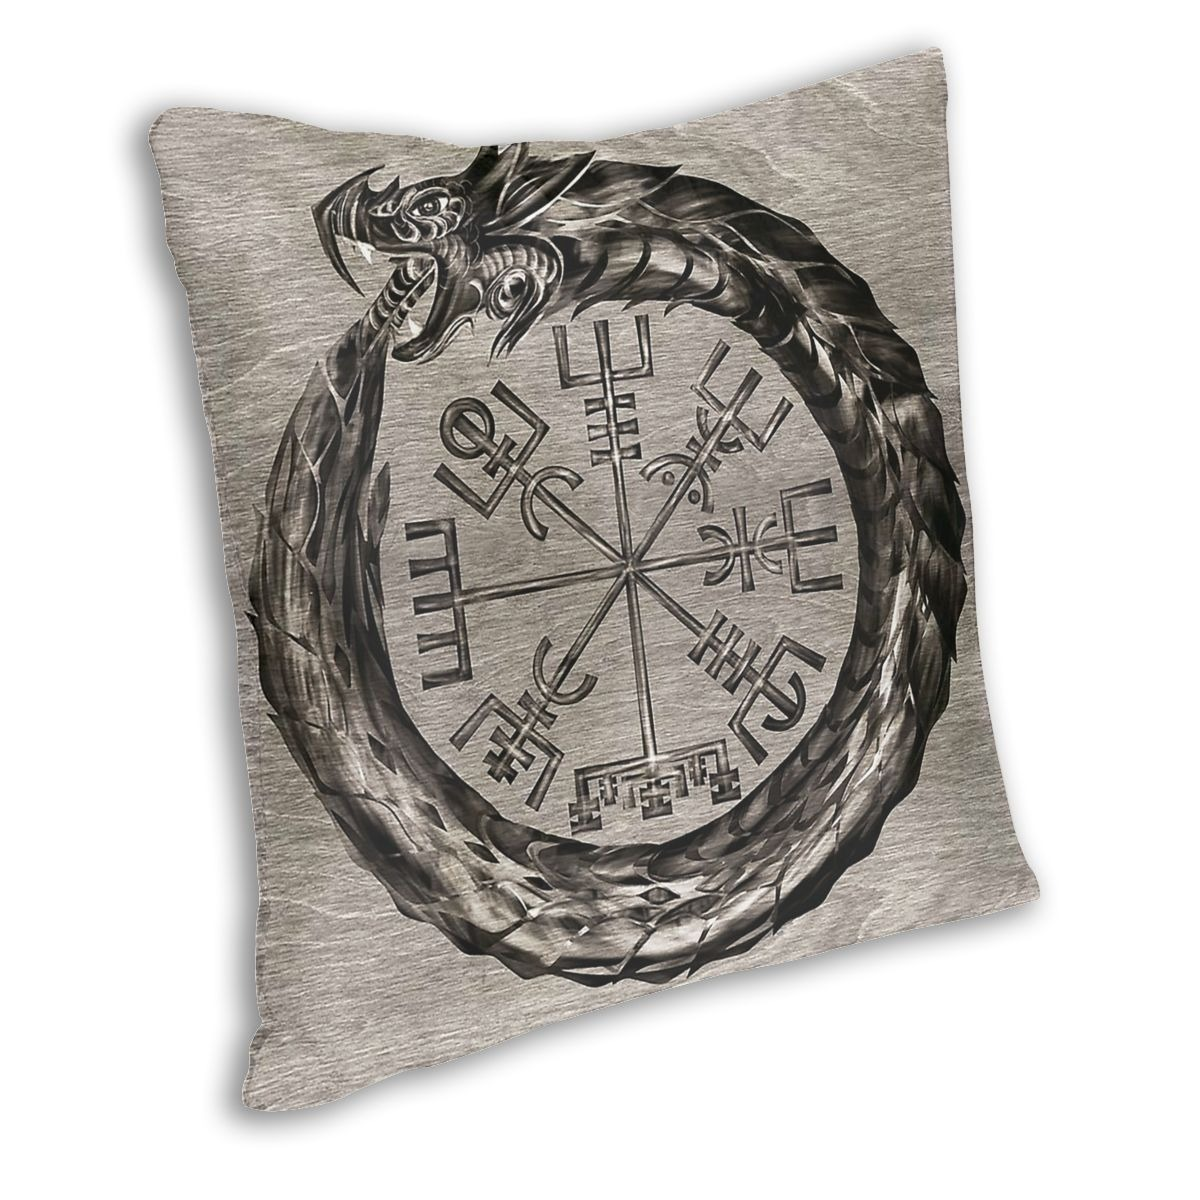 Pillow Cover Home Decor With Vegvisir Viking / Cushion Cover Throw Pillow Double-sided Printing - HARD'N'HEAVY